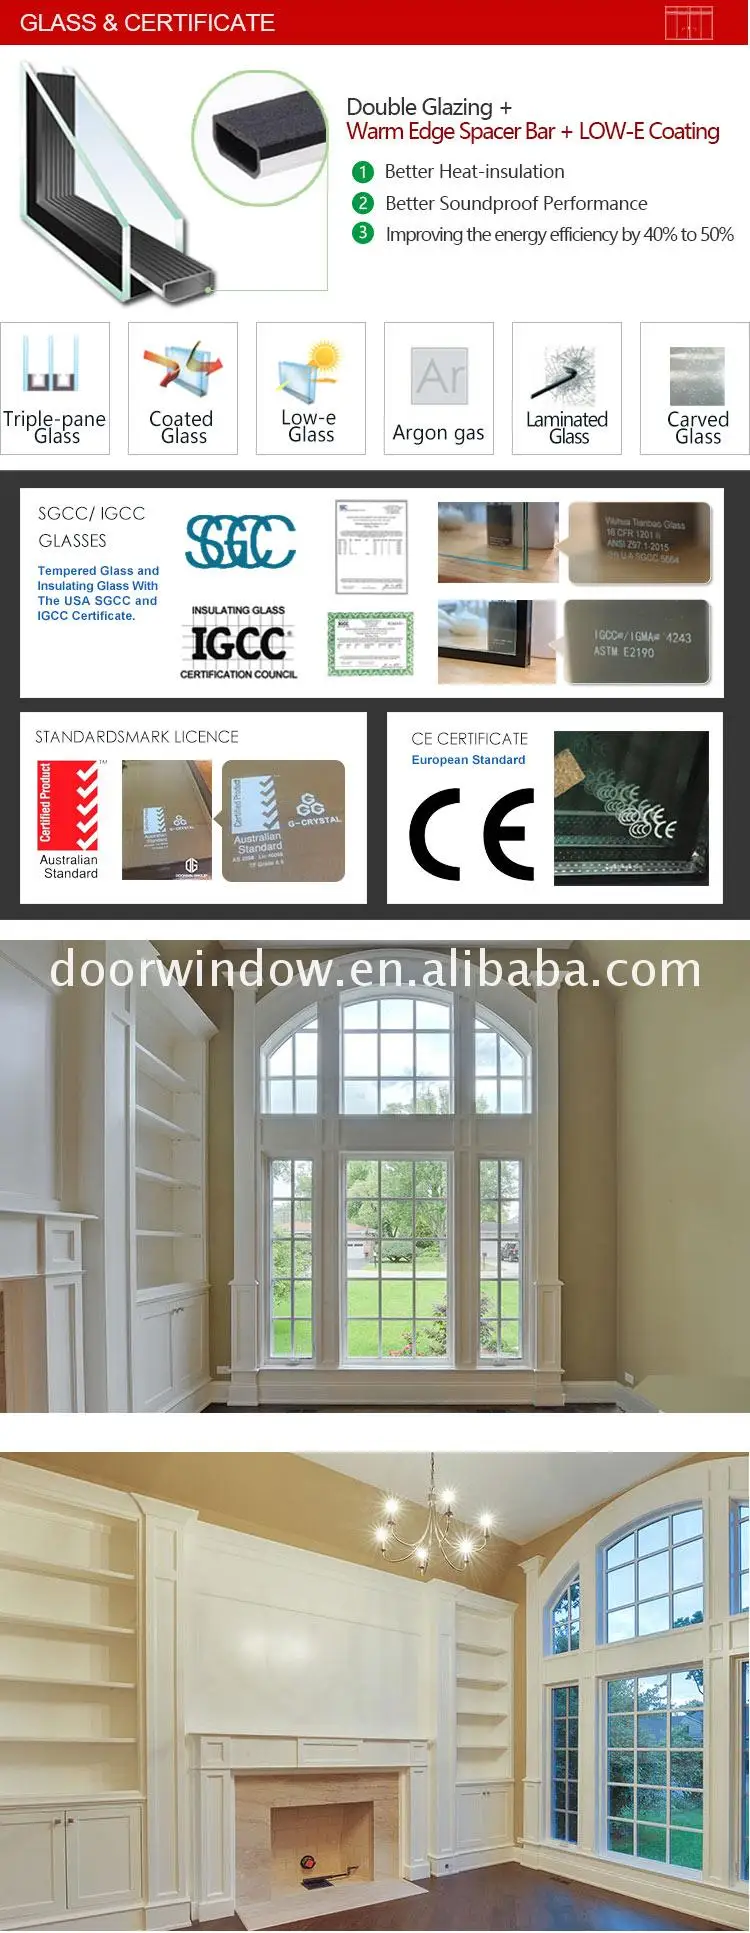 China factory supplied top quality wood windows dallas grill design for home pdf images